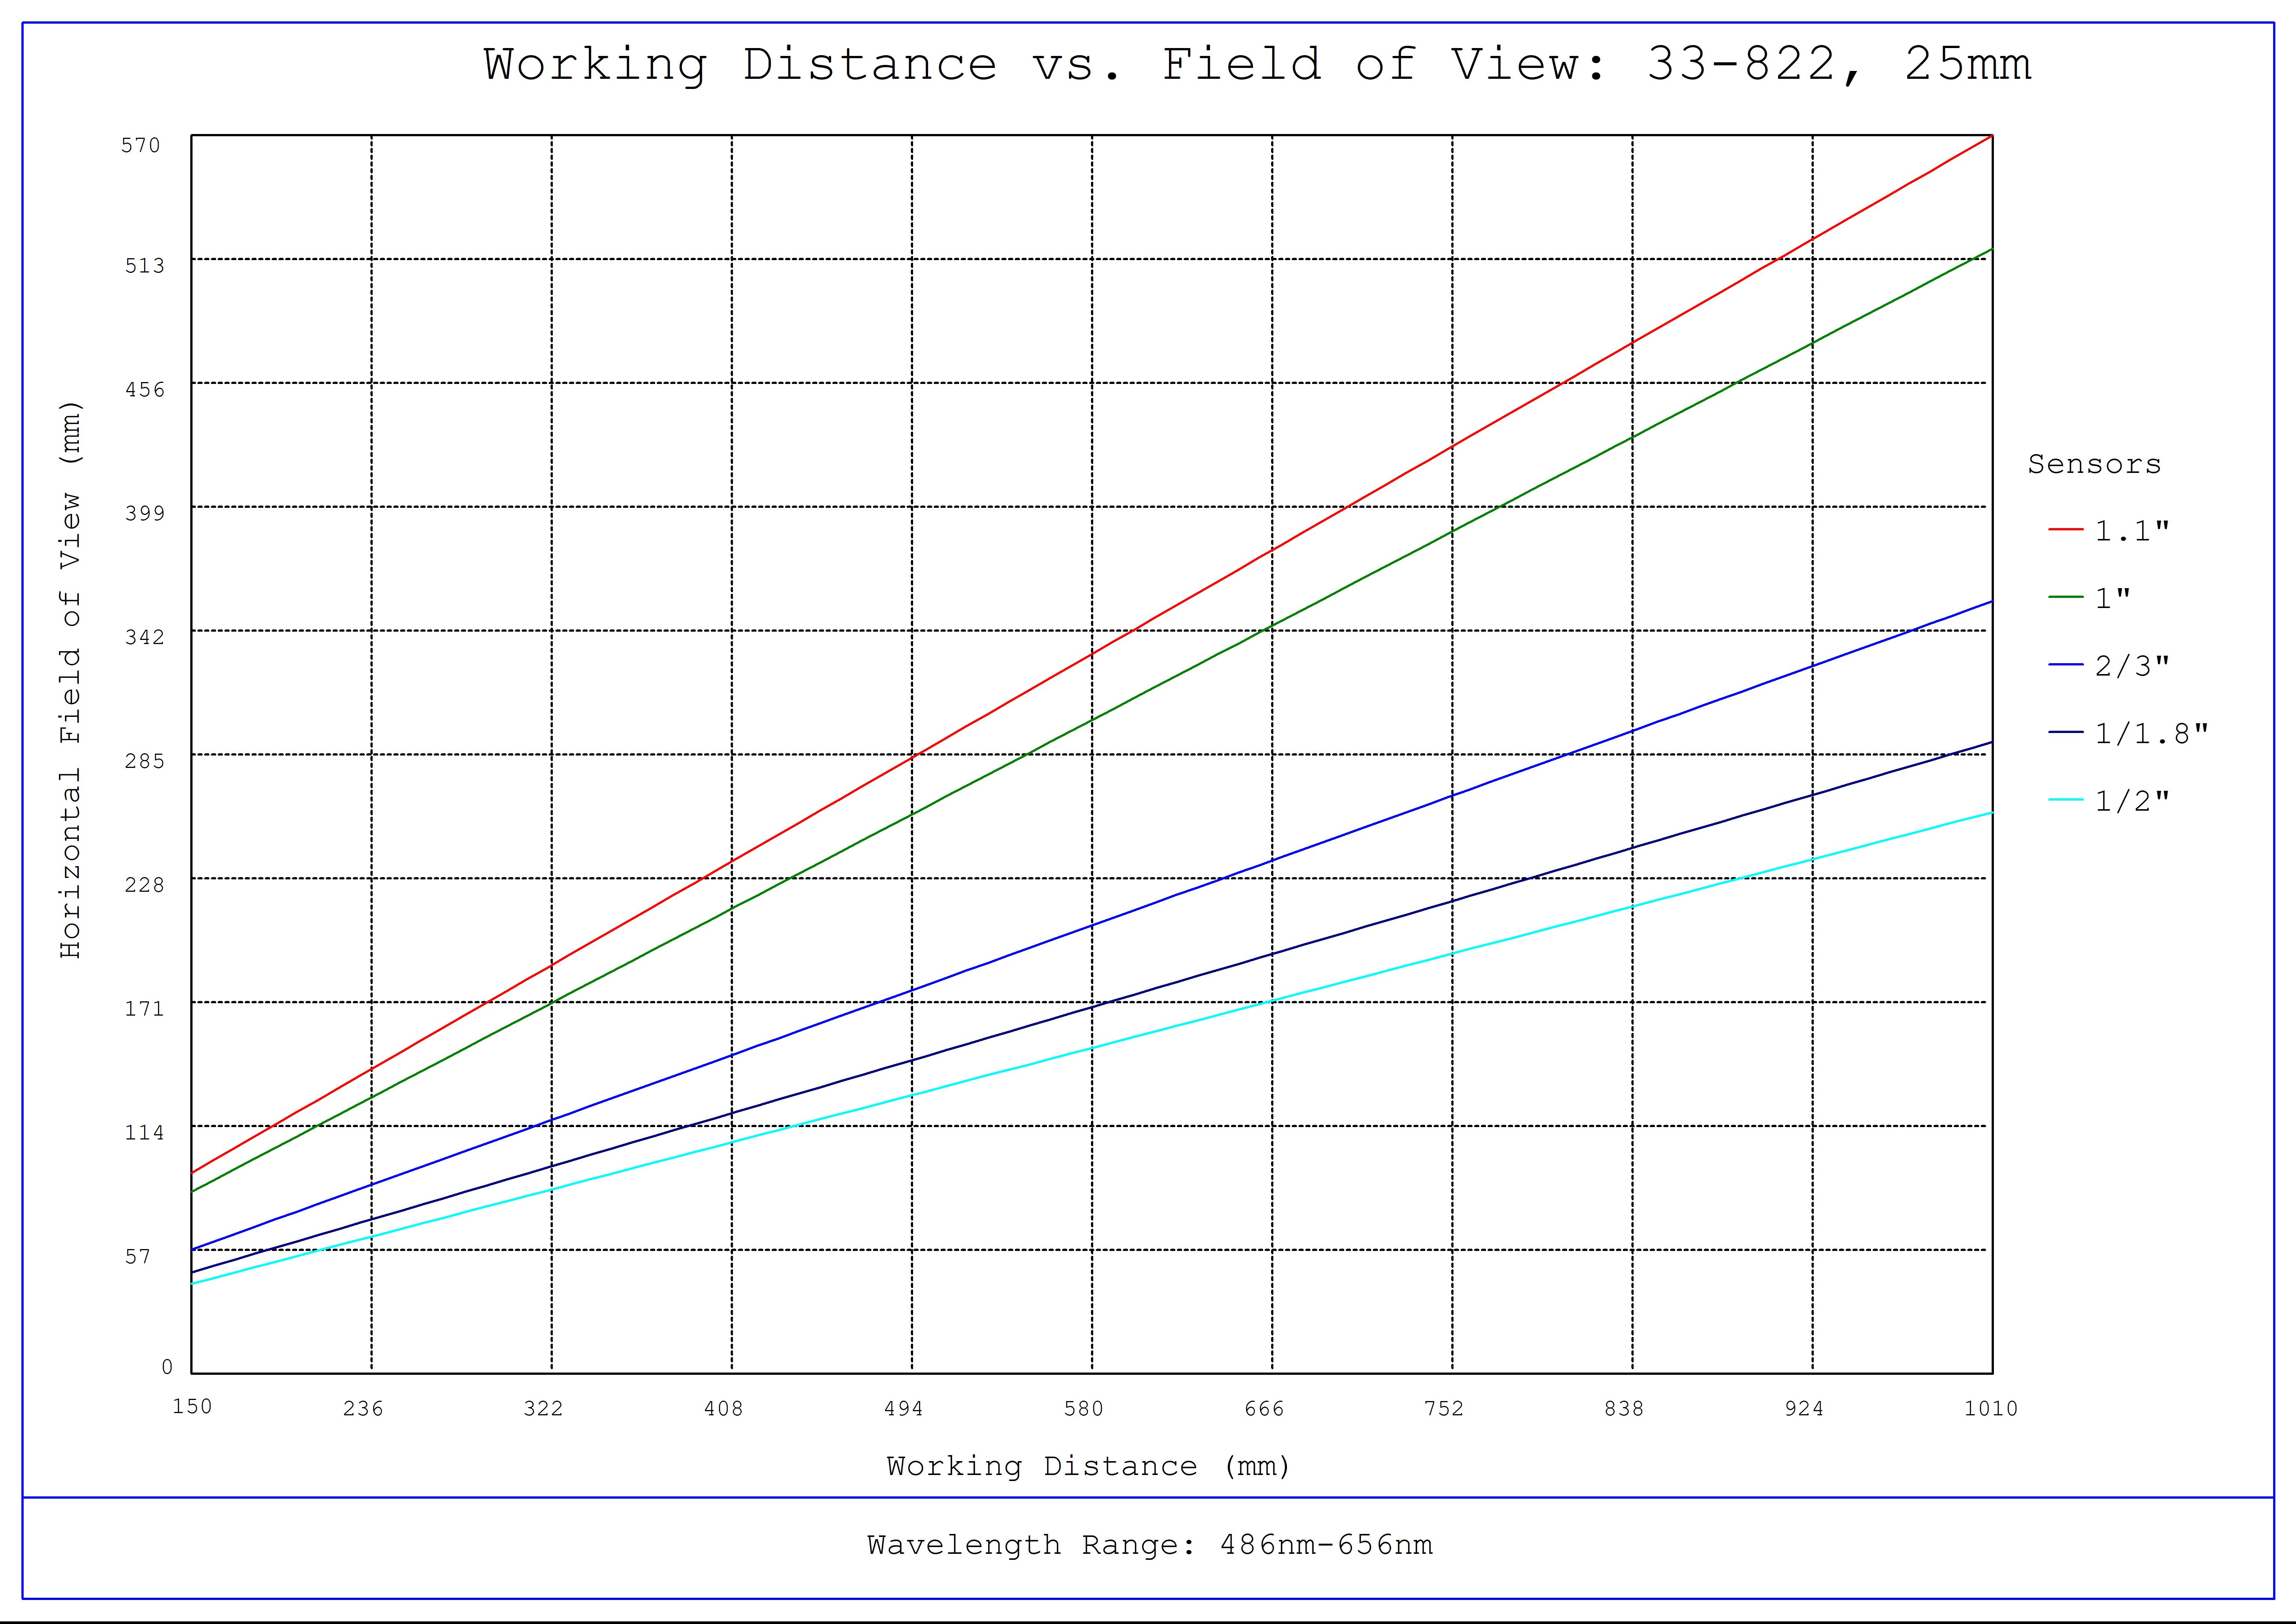 #33-822, 25mm f/2.0, HPi Series Fixed Focal Length Lens, Working Distance versus Field of View Plot